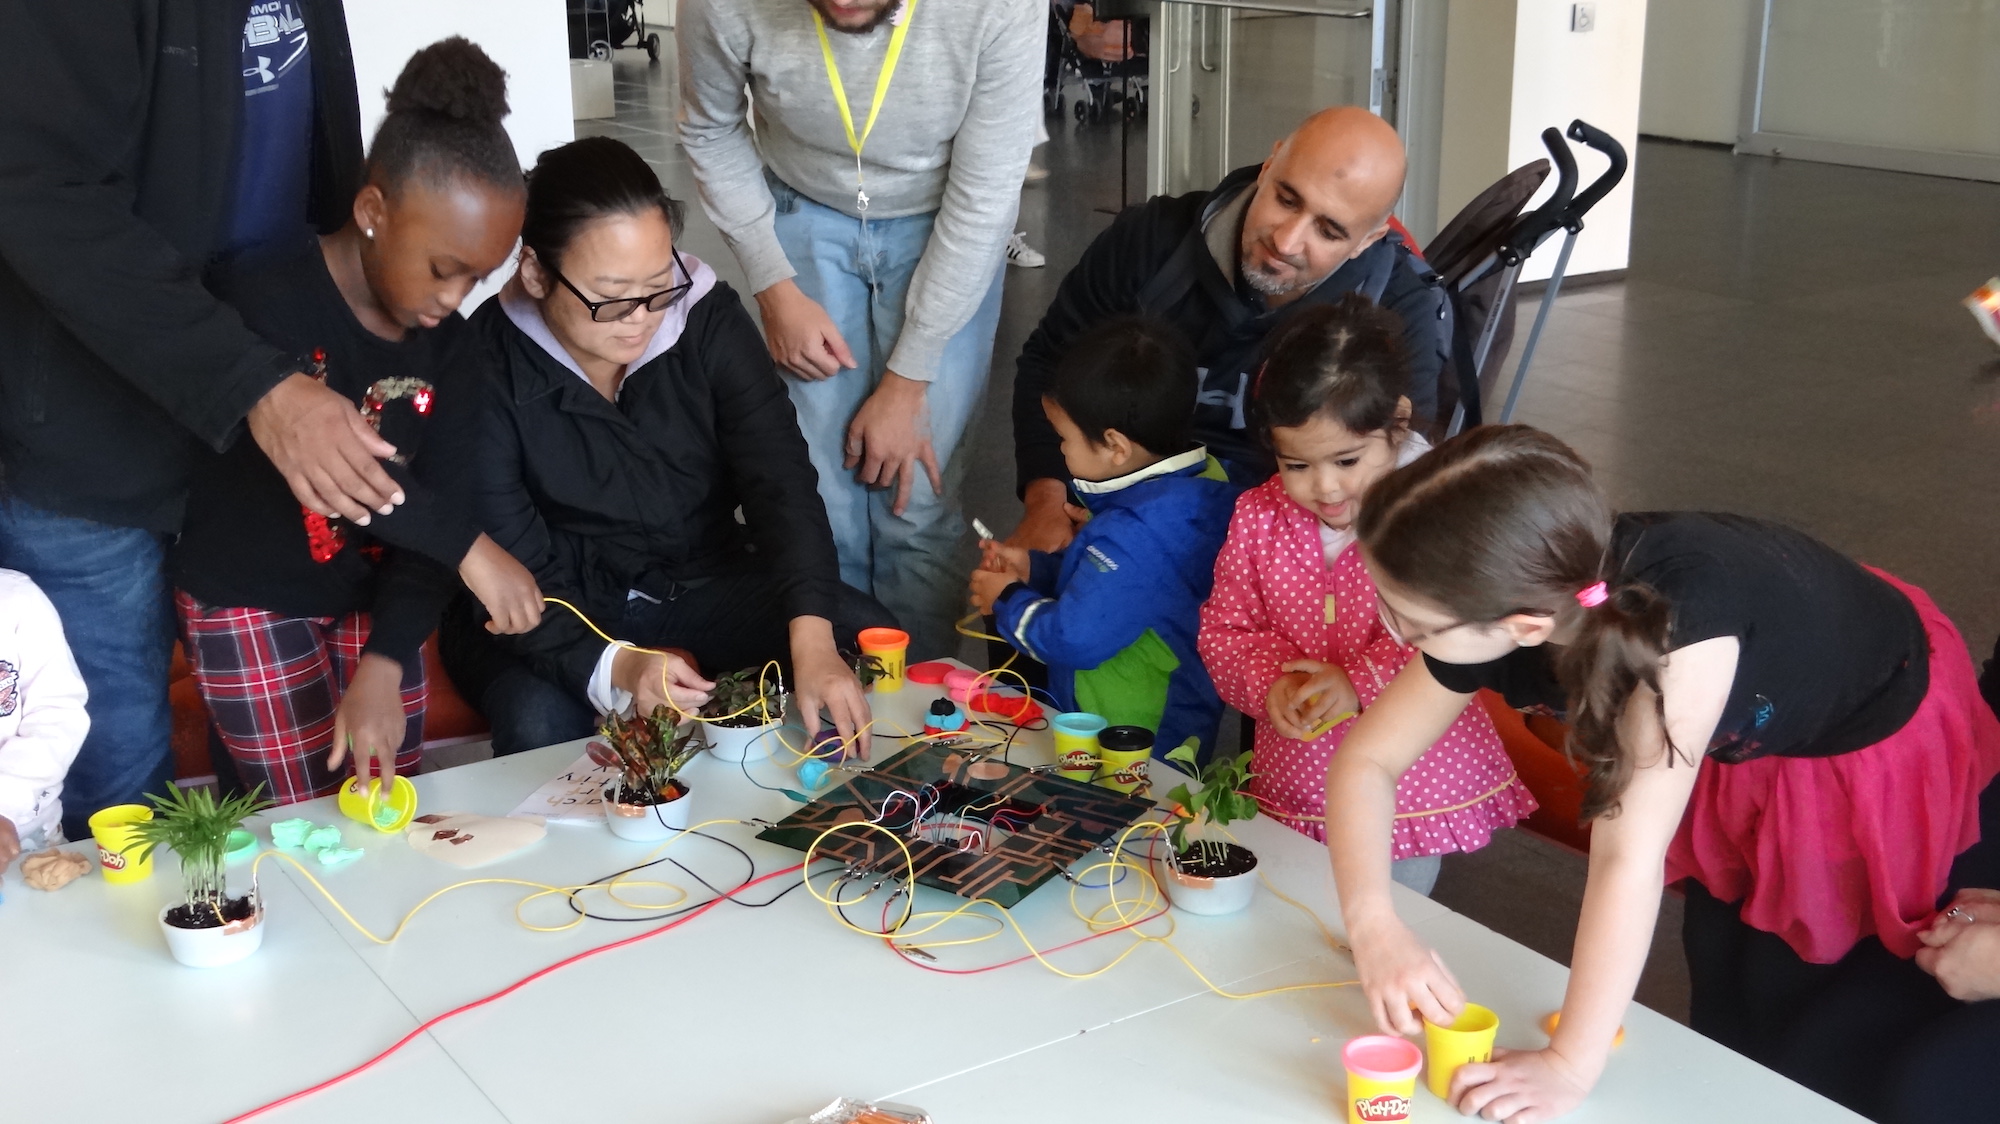 a family gathered by a table, playing with conductive circuits